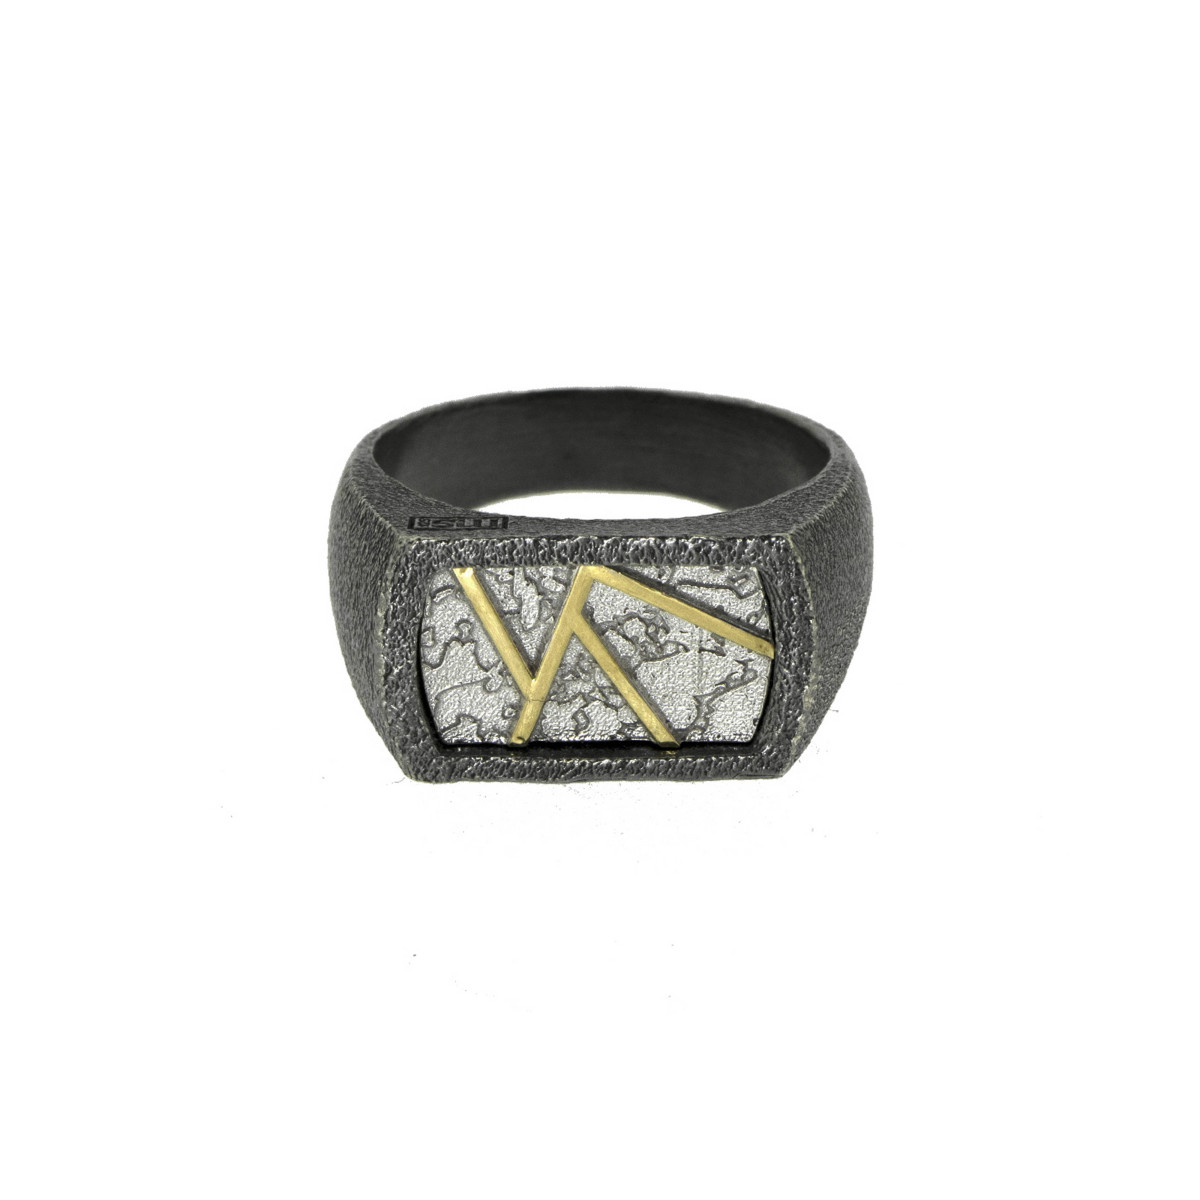 Silver and 18k gold ring